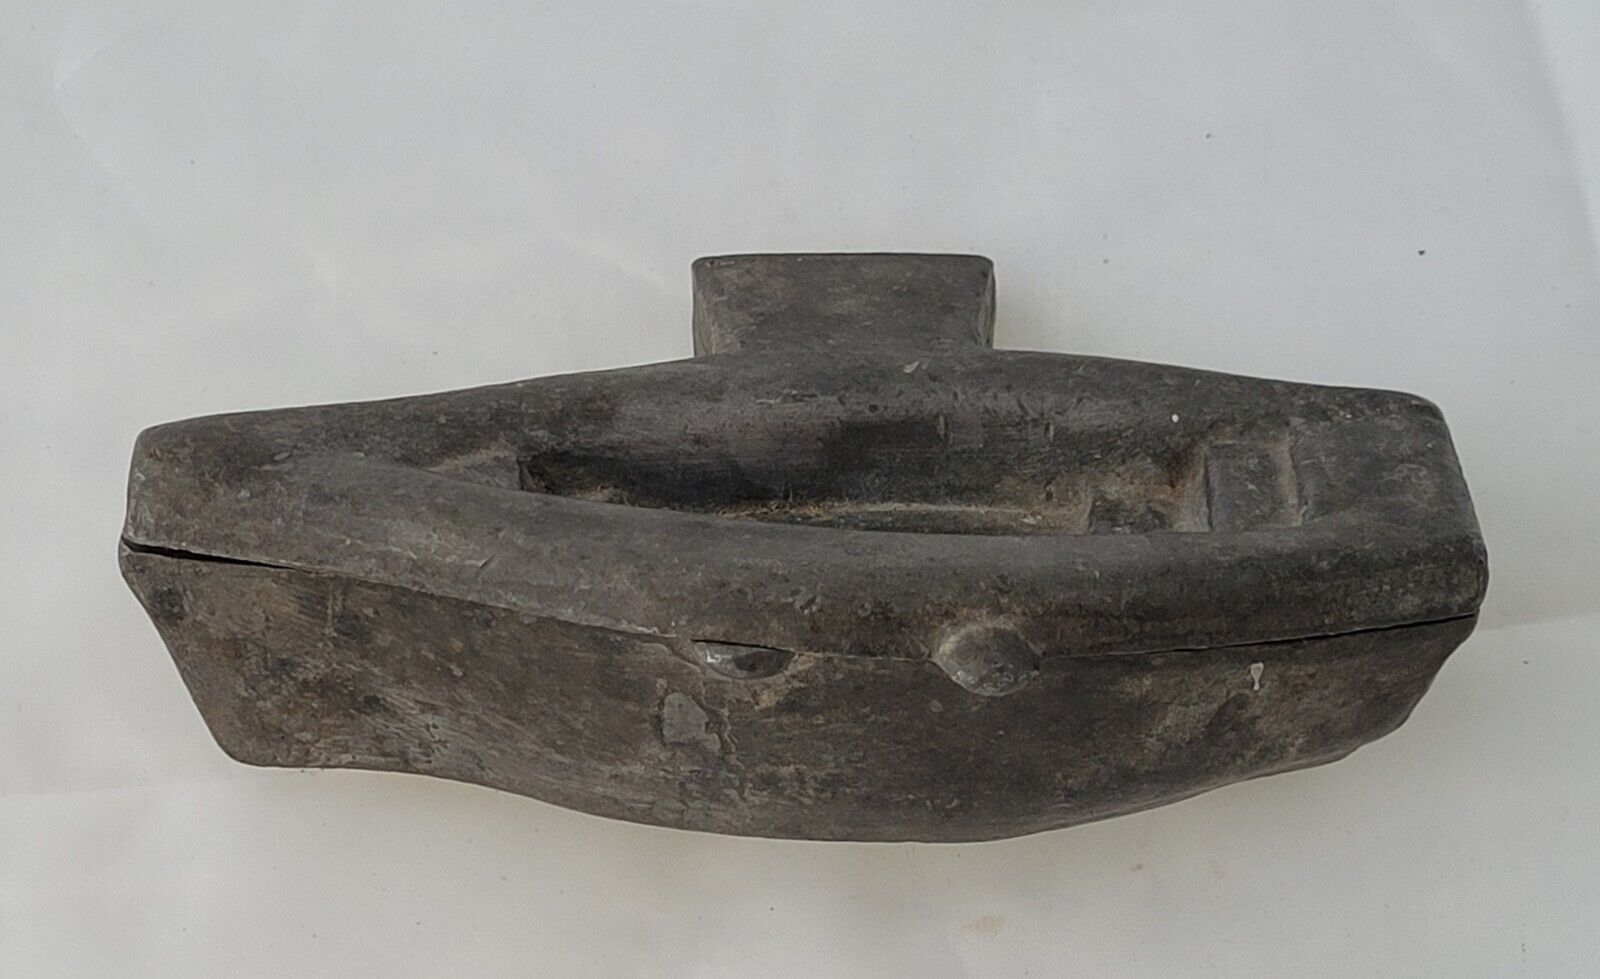 GREAT 19th CENTURY VINTAGE S & C? ANTIQUE LEAD PEWTER ROWBOAT ICE CREAM MOLD 5\